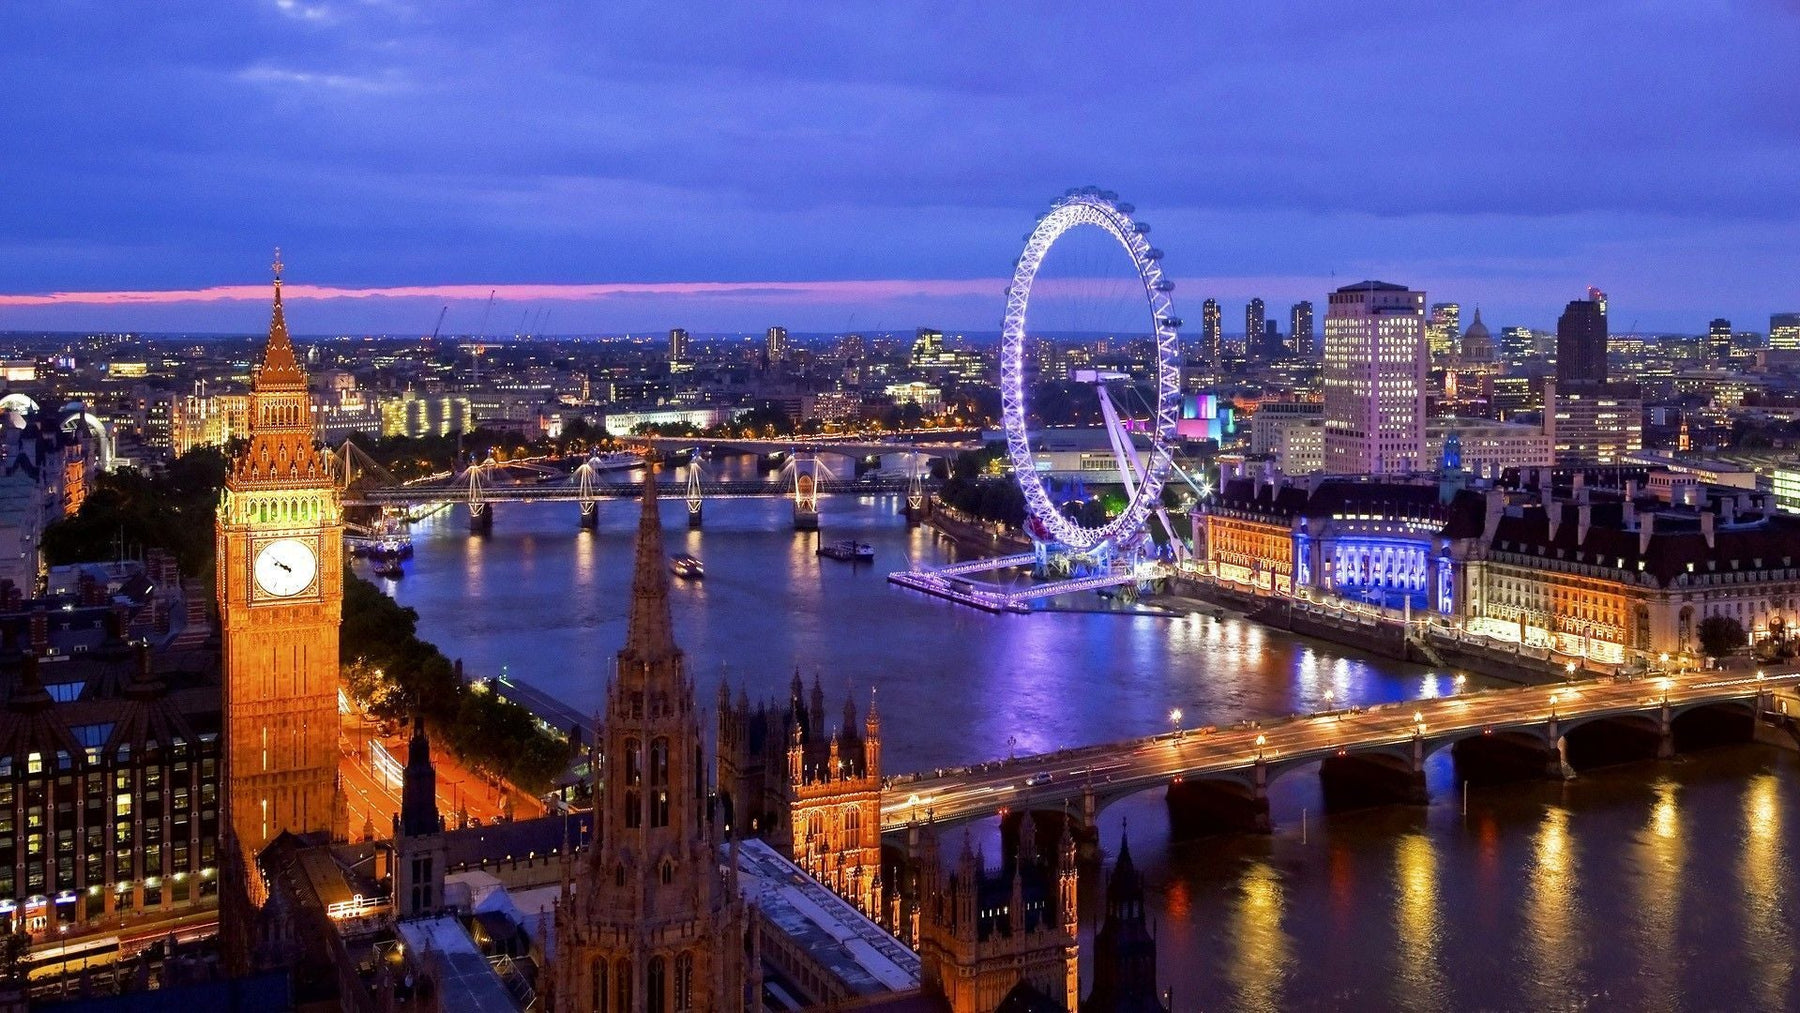 Take a Trip to London, England. Here are the Top 5 Places to Visit! - British Bundles